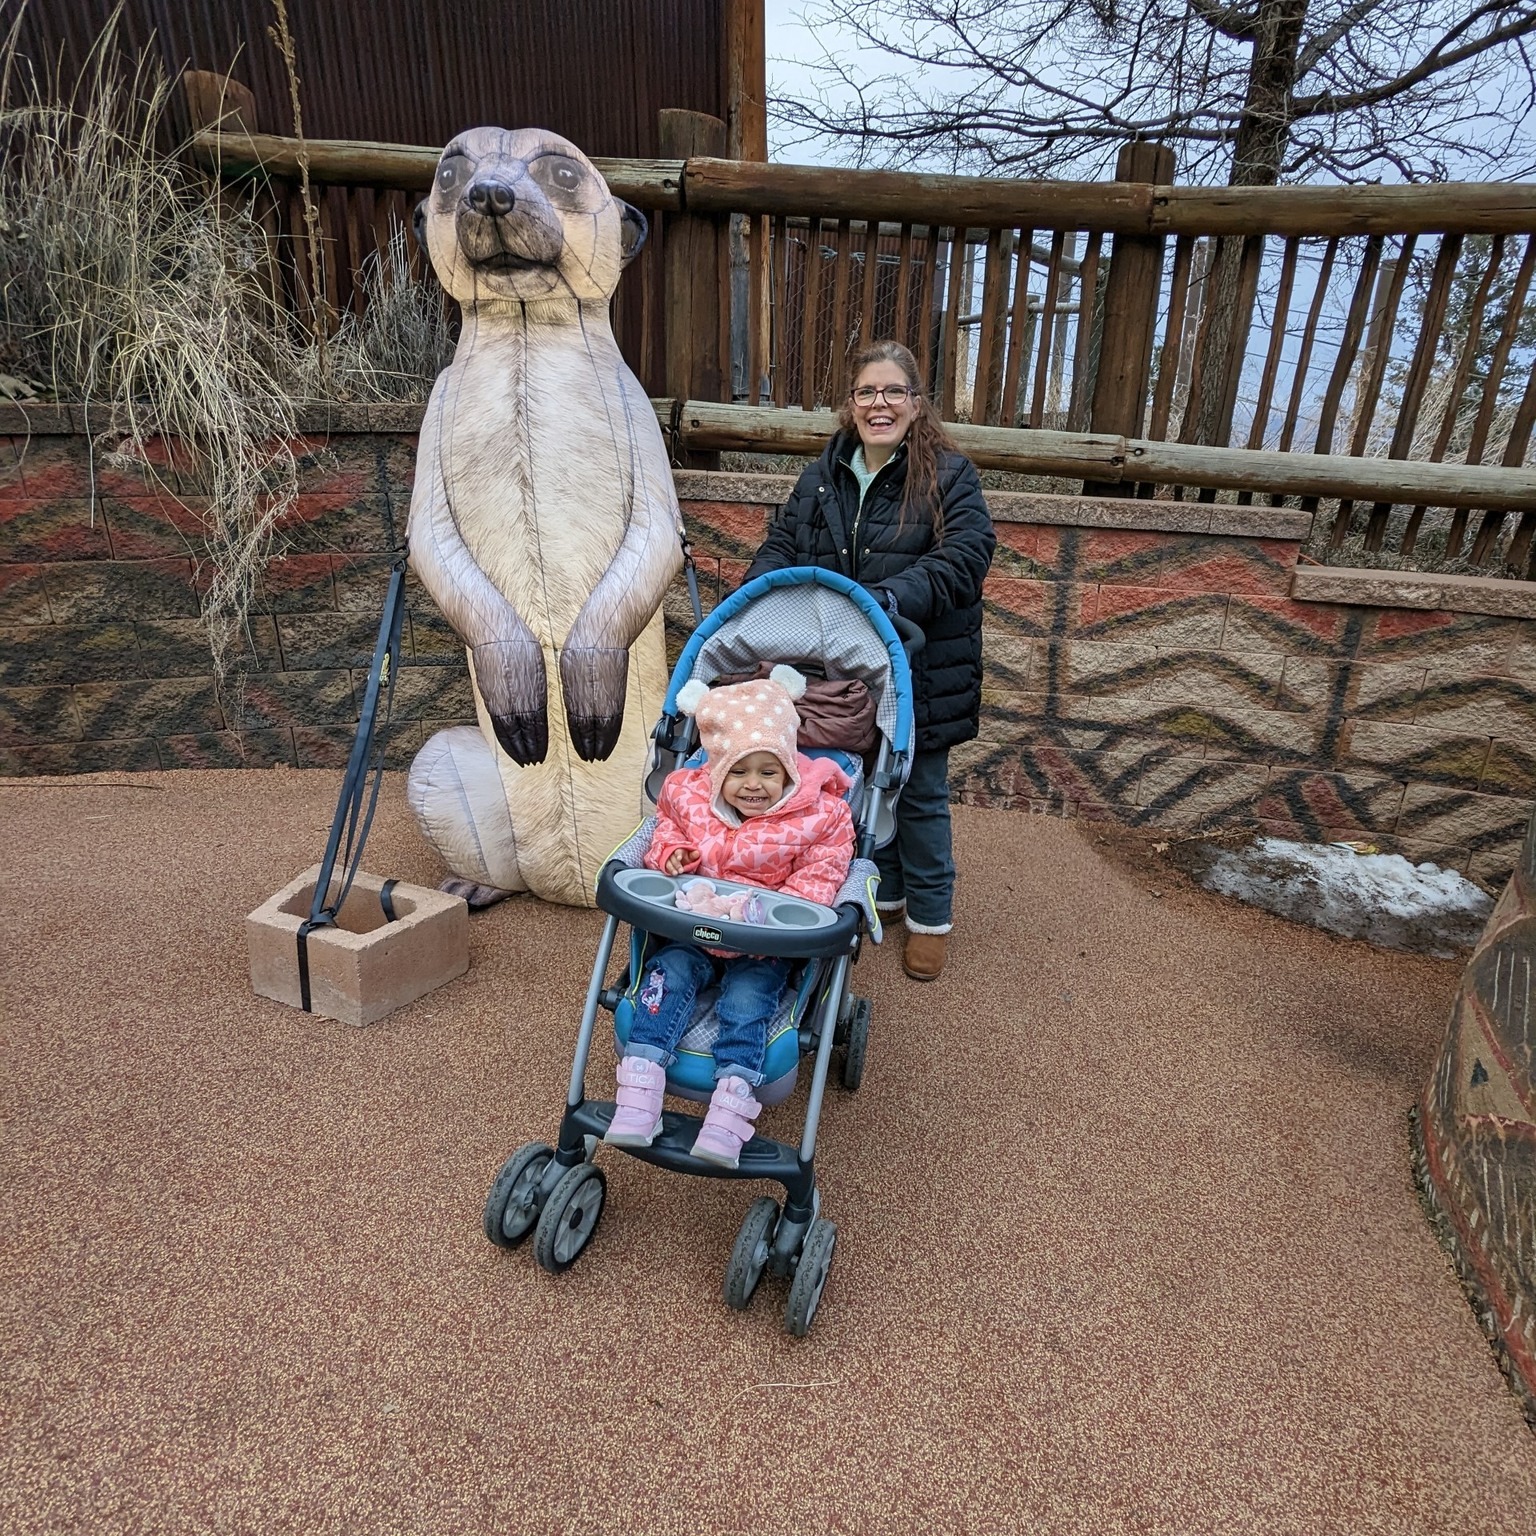 toddler seated in a stroller smiles at viewer while adult stands behind; they are both in front of a large plastic meerkat